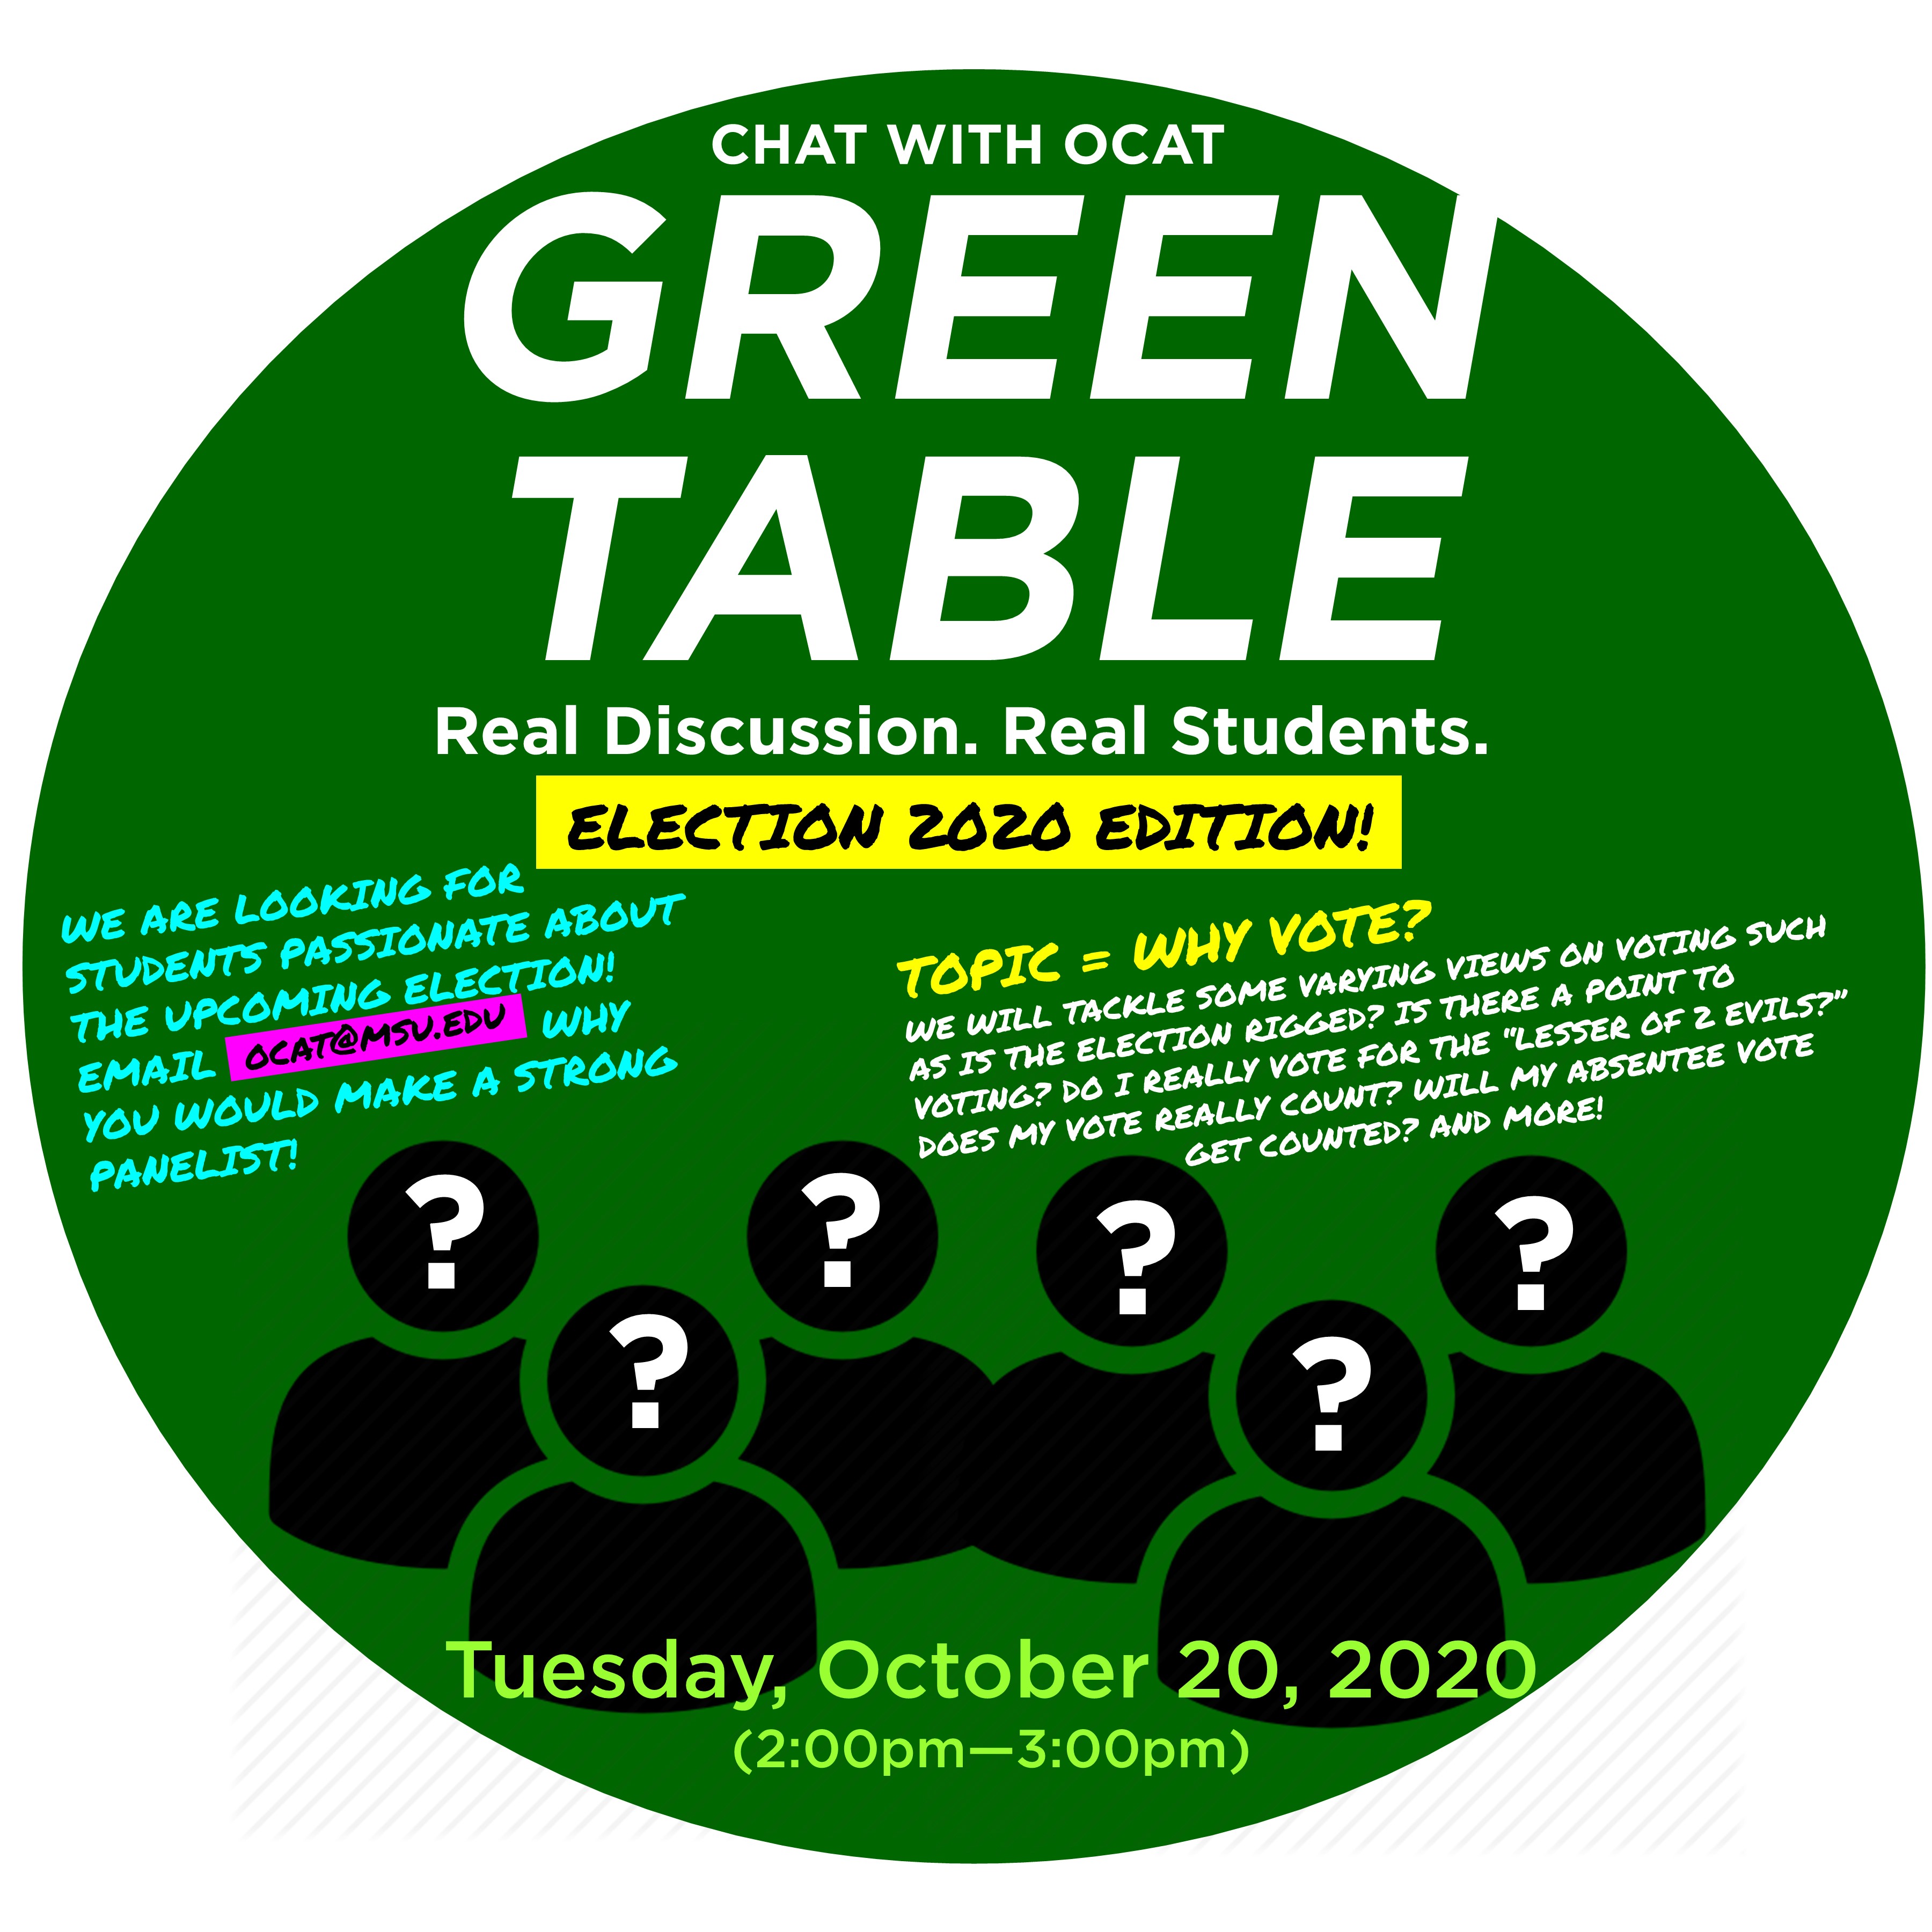 OCAT’s Green Table: Election 2020 Edition